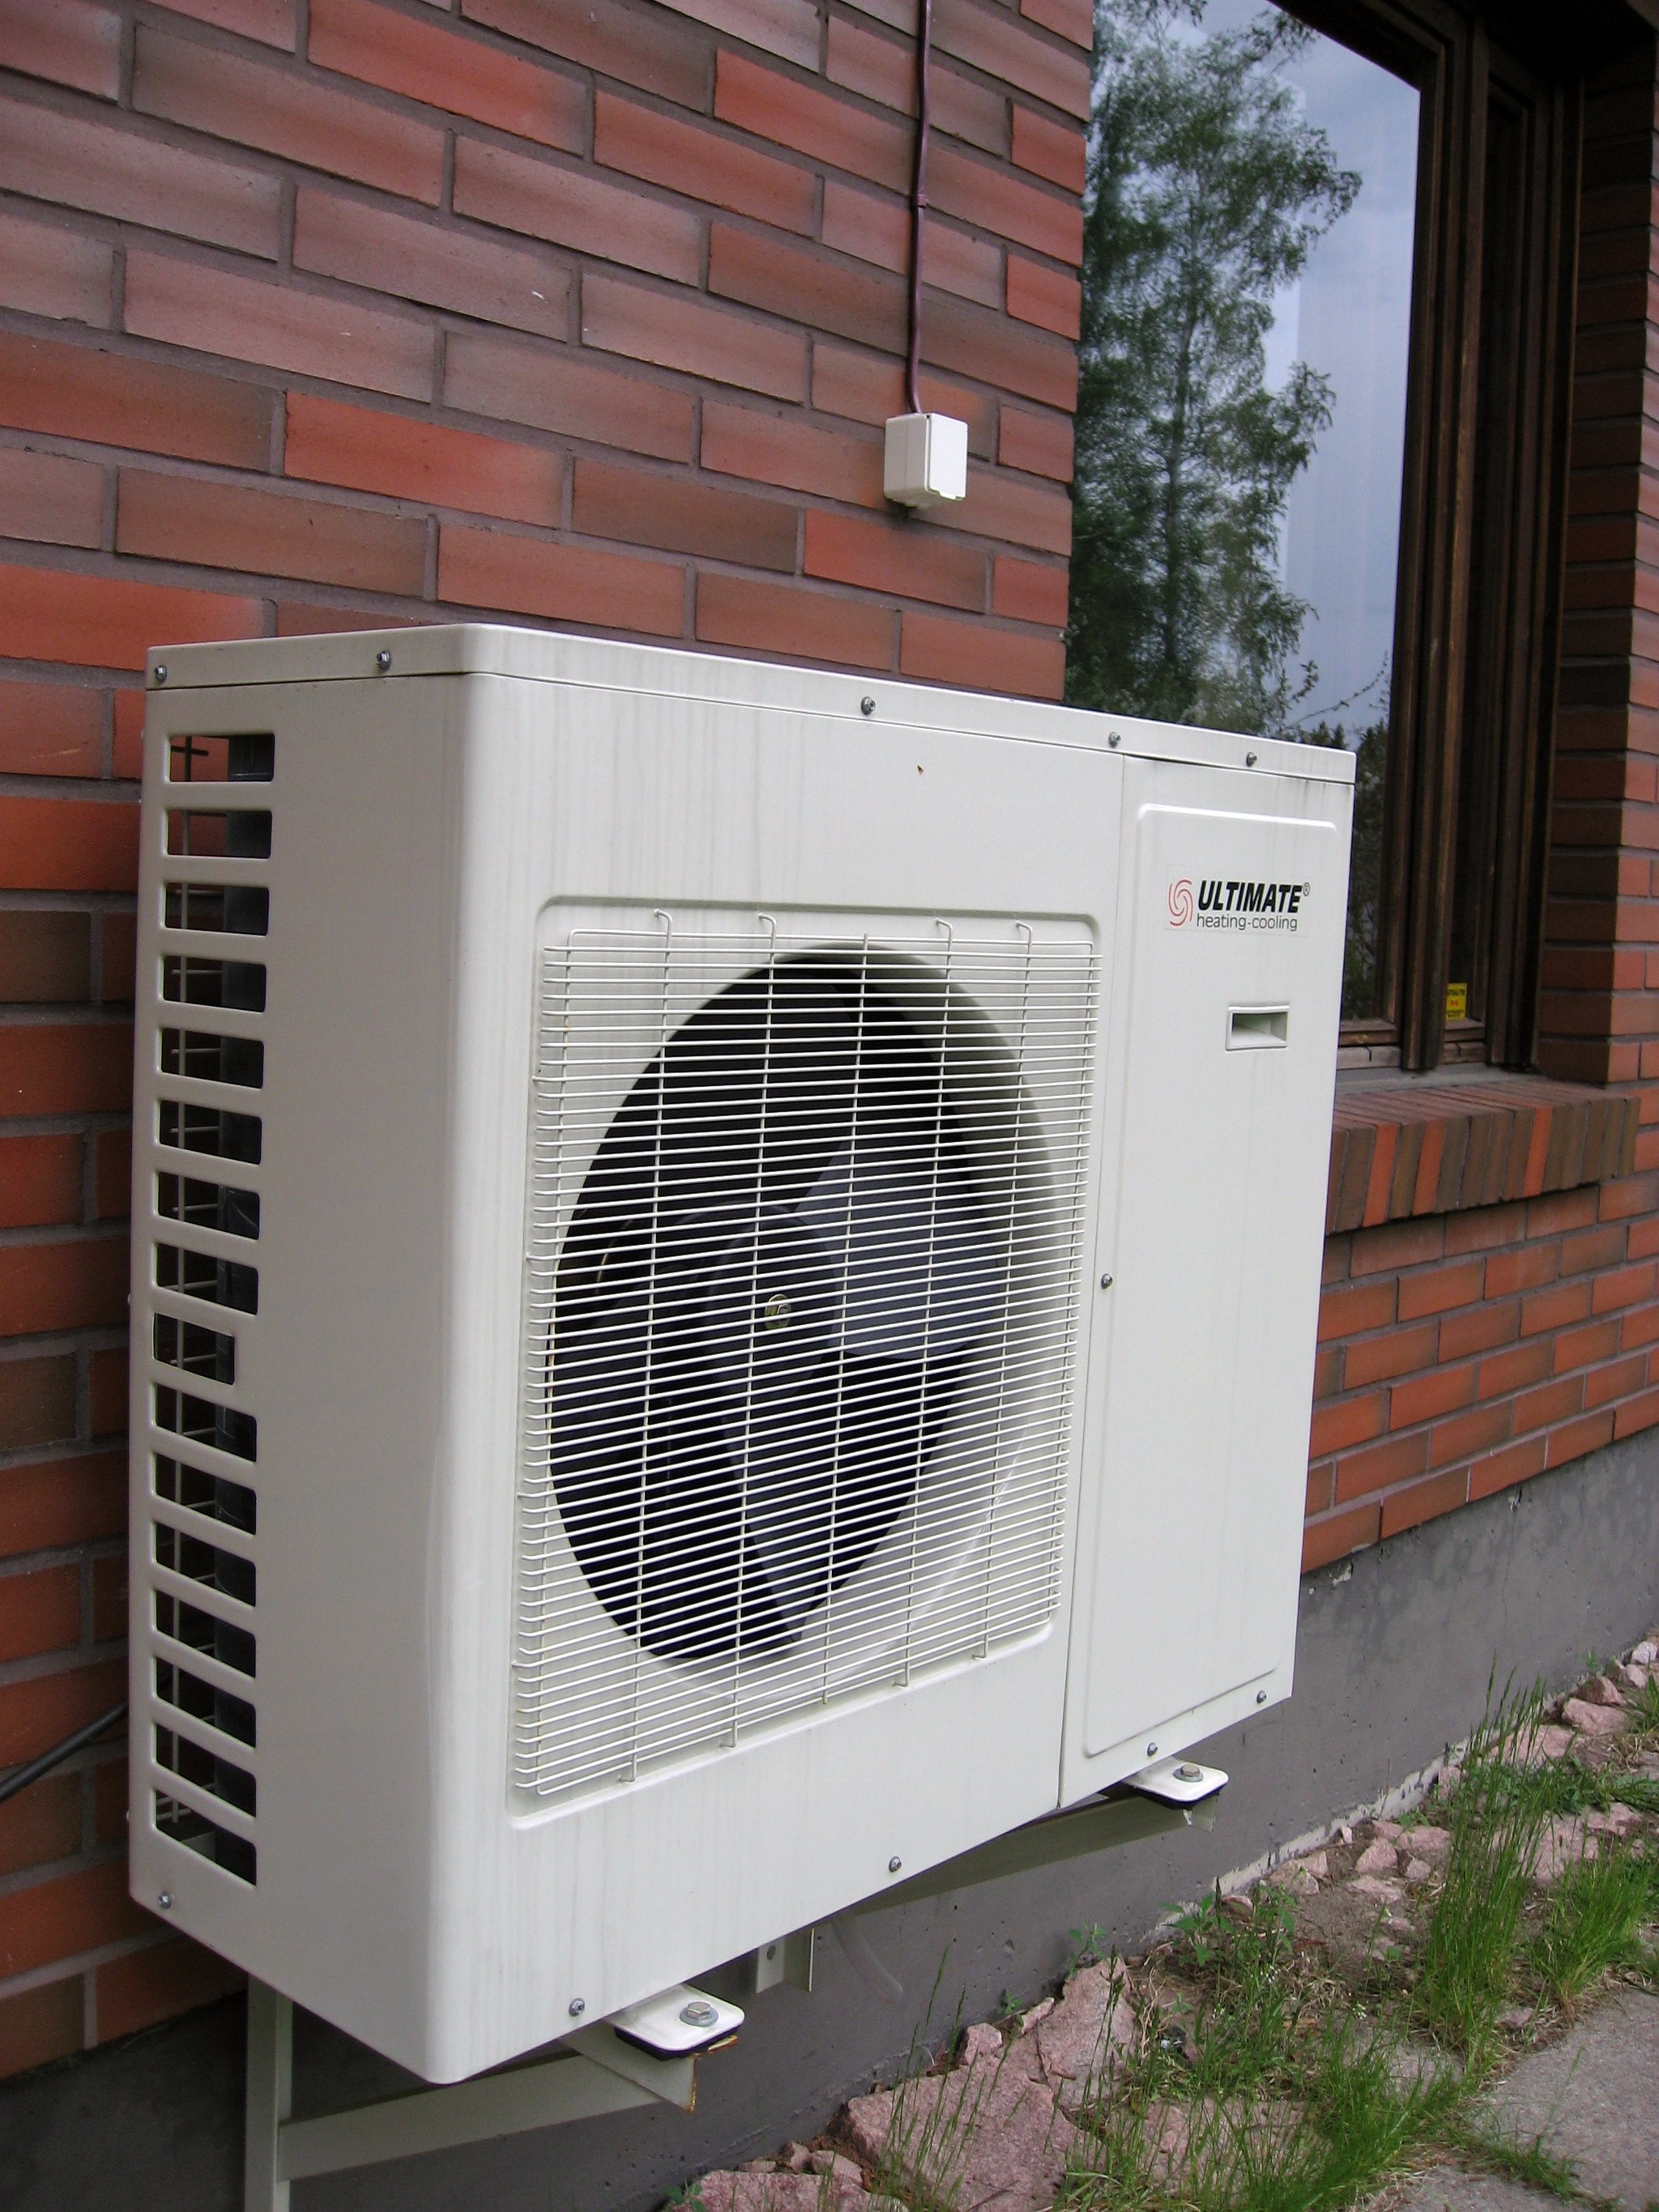  Picture of an outdoor unit of a mini-split residential heat pump. Public domain, via Wikimedia Commons.